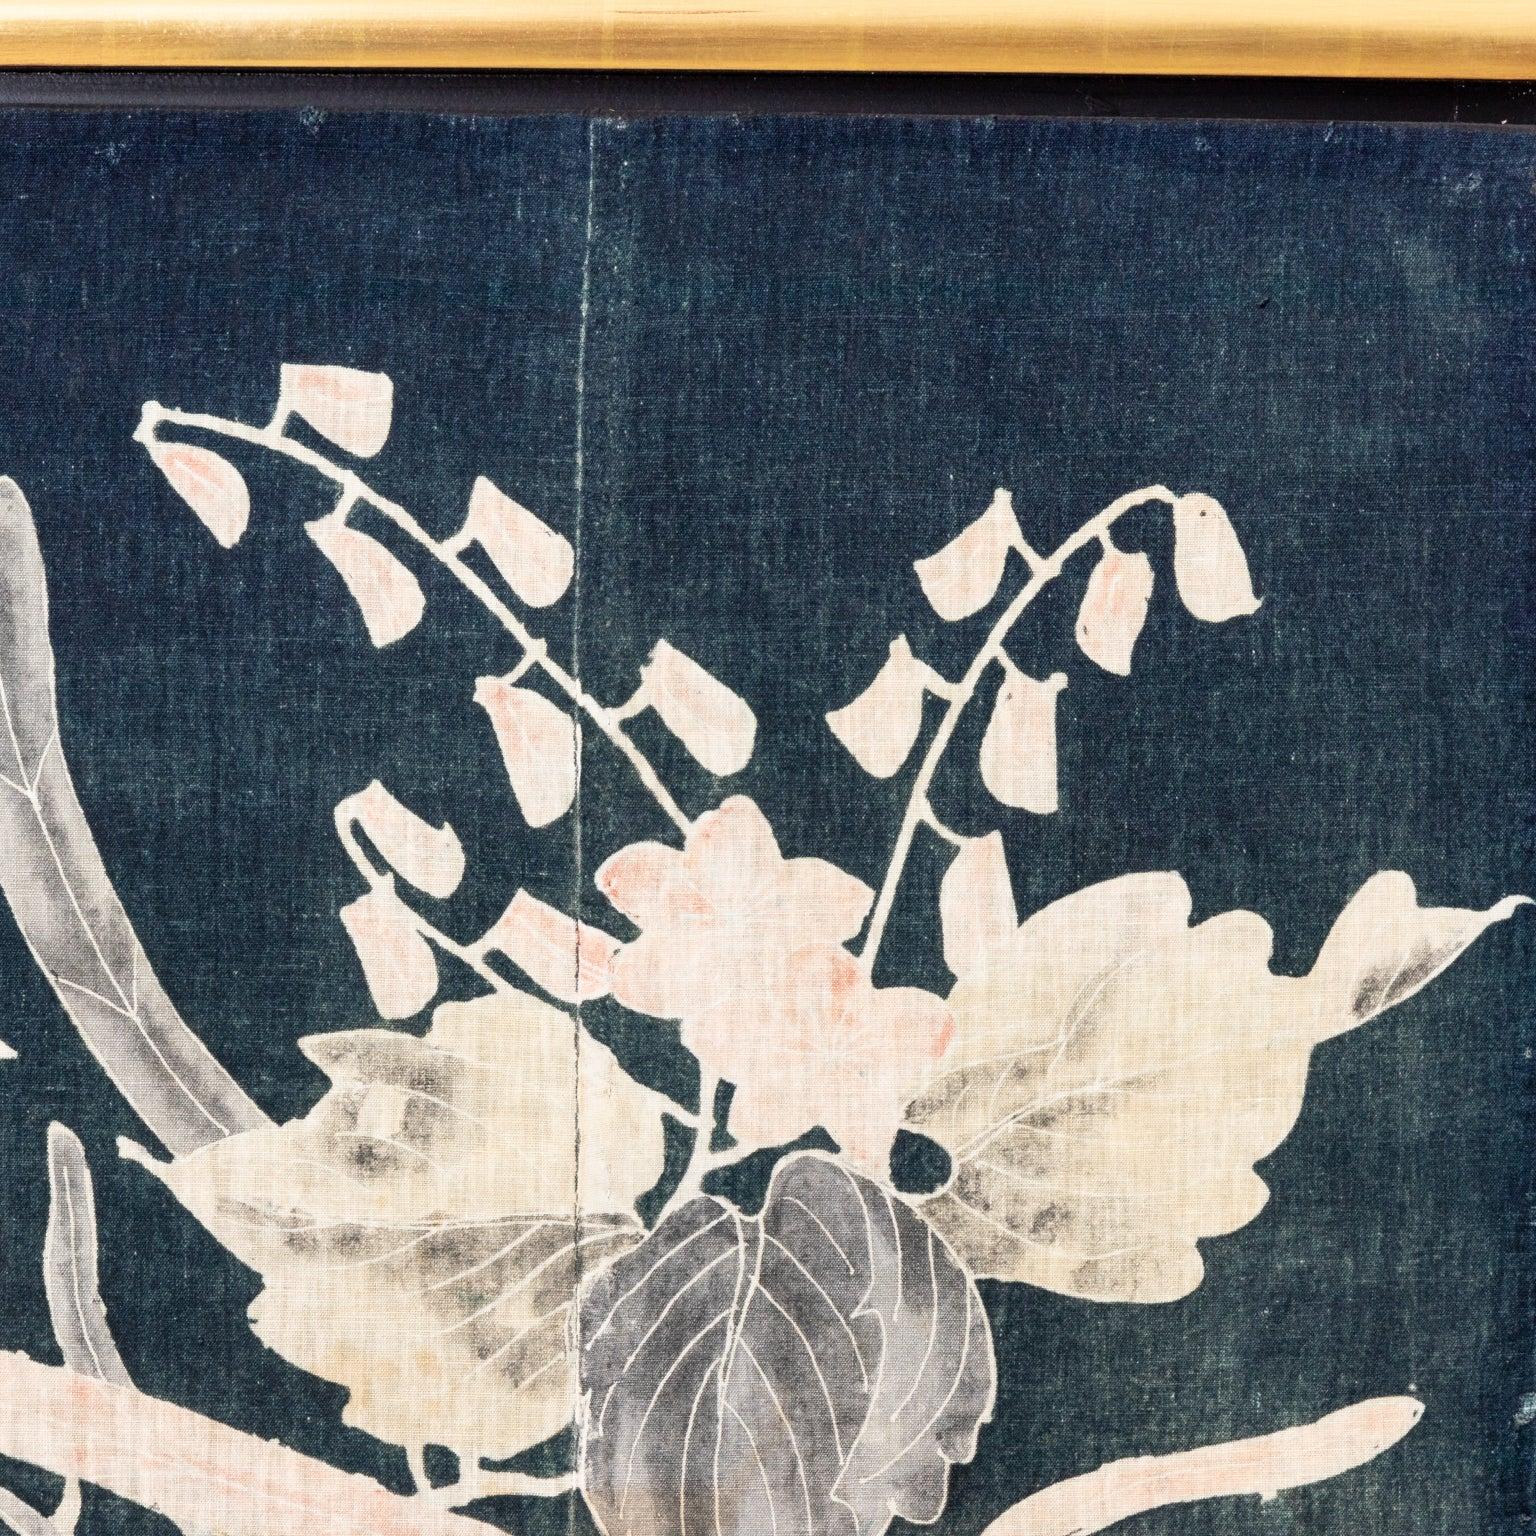 Japanese Meiji period 19th century futon cover framed. Made with natural dyes tsutsugaki drawings with flying phoenix. Please note of wear consistent with age.